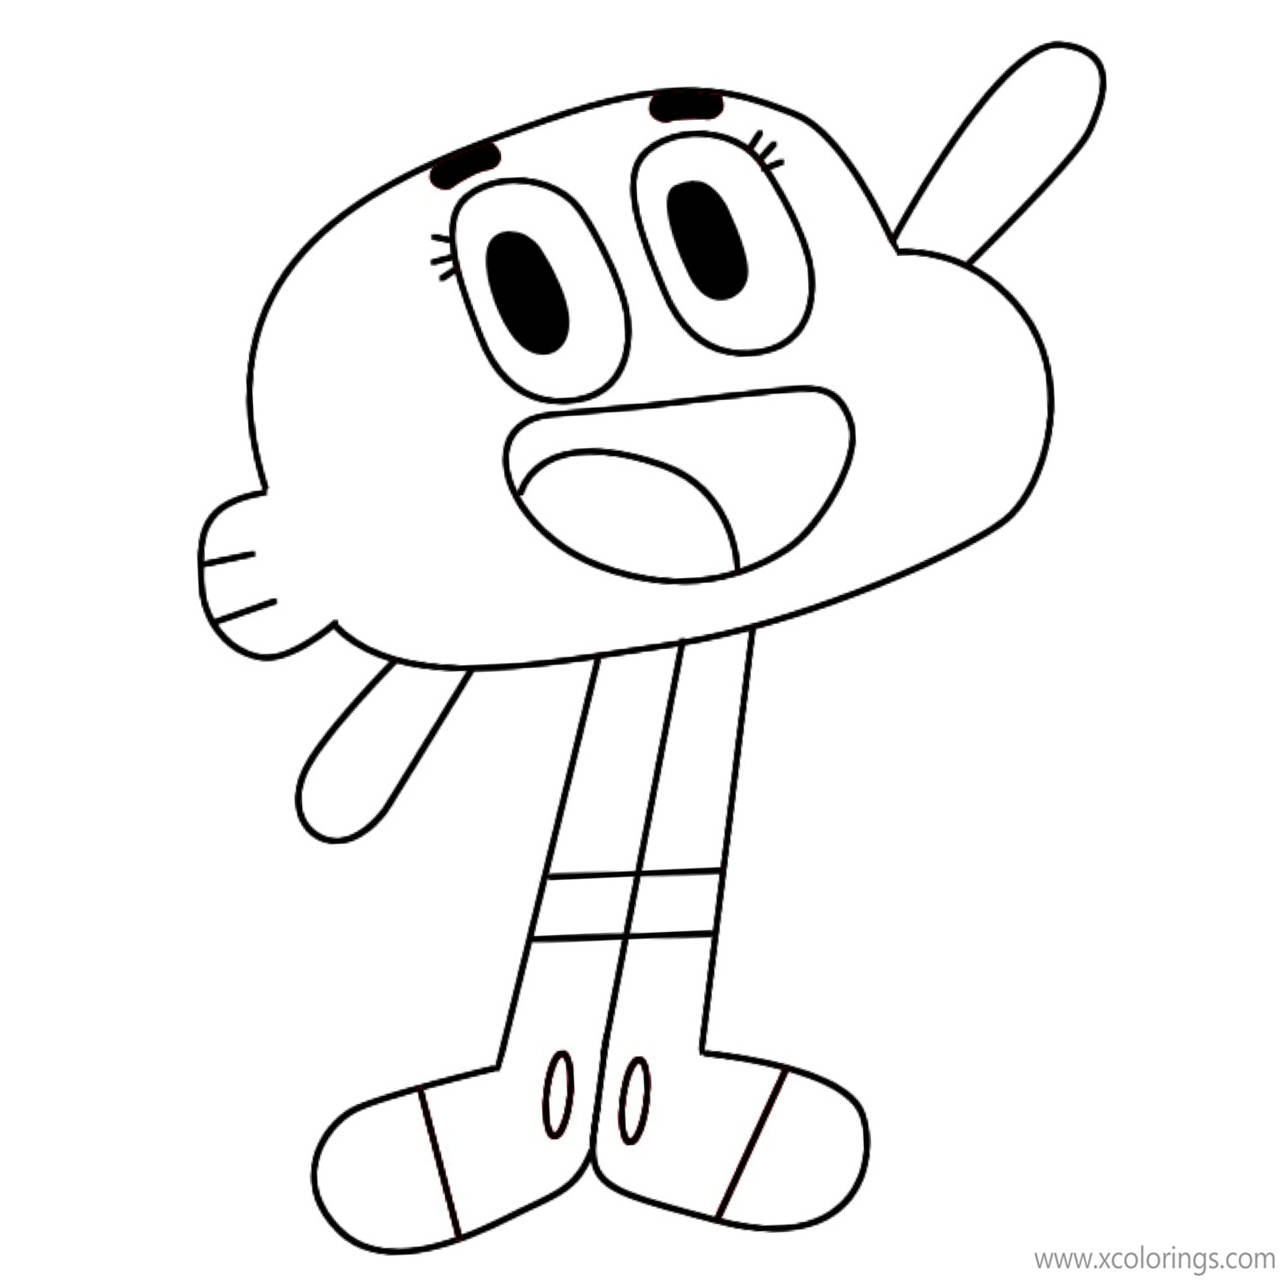 Free Darwin from The Amazing World of Gumball Coloring Pages printable